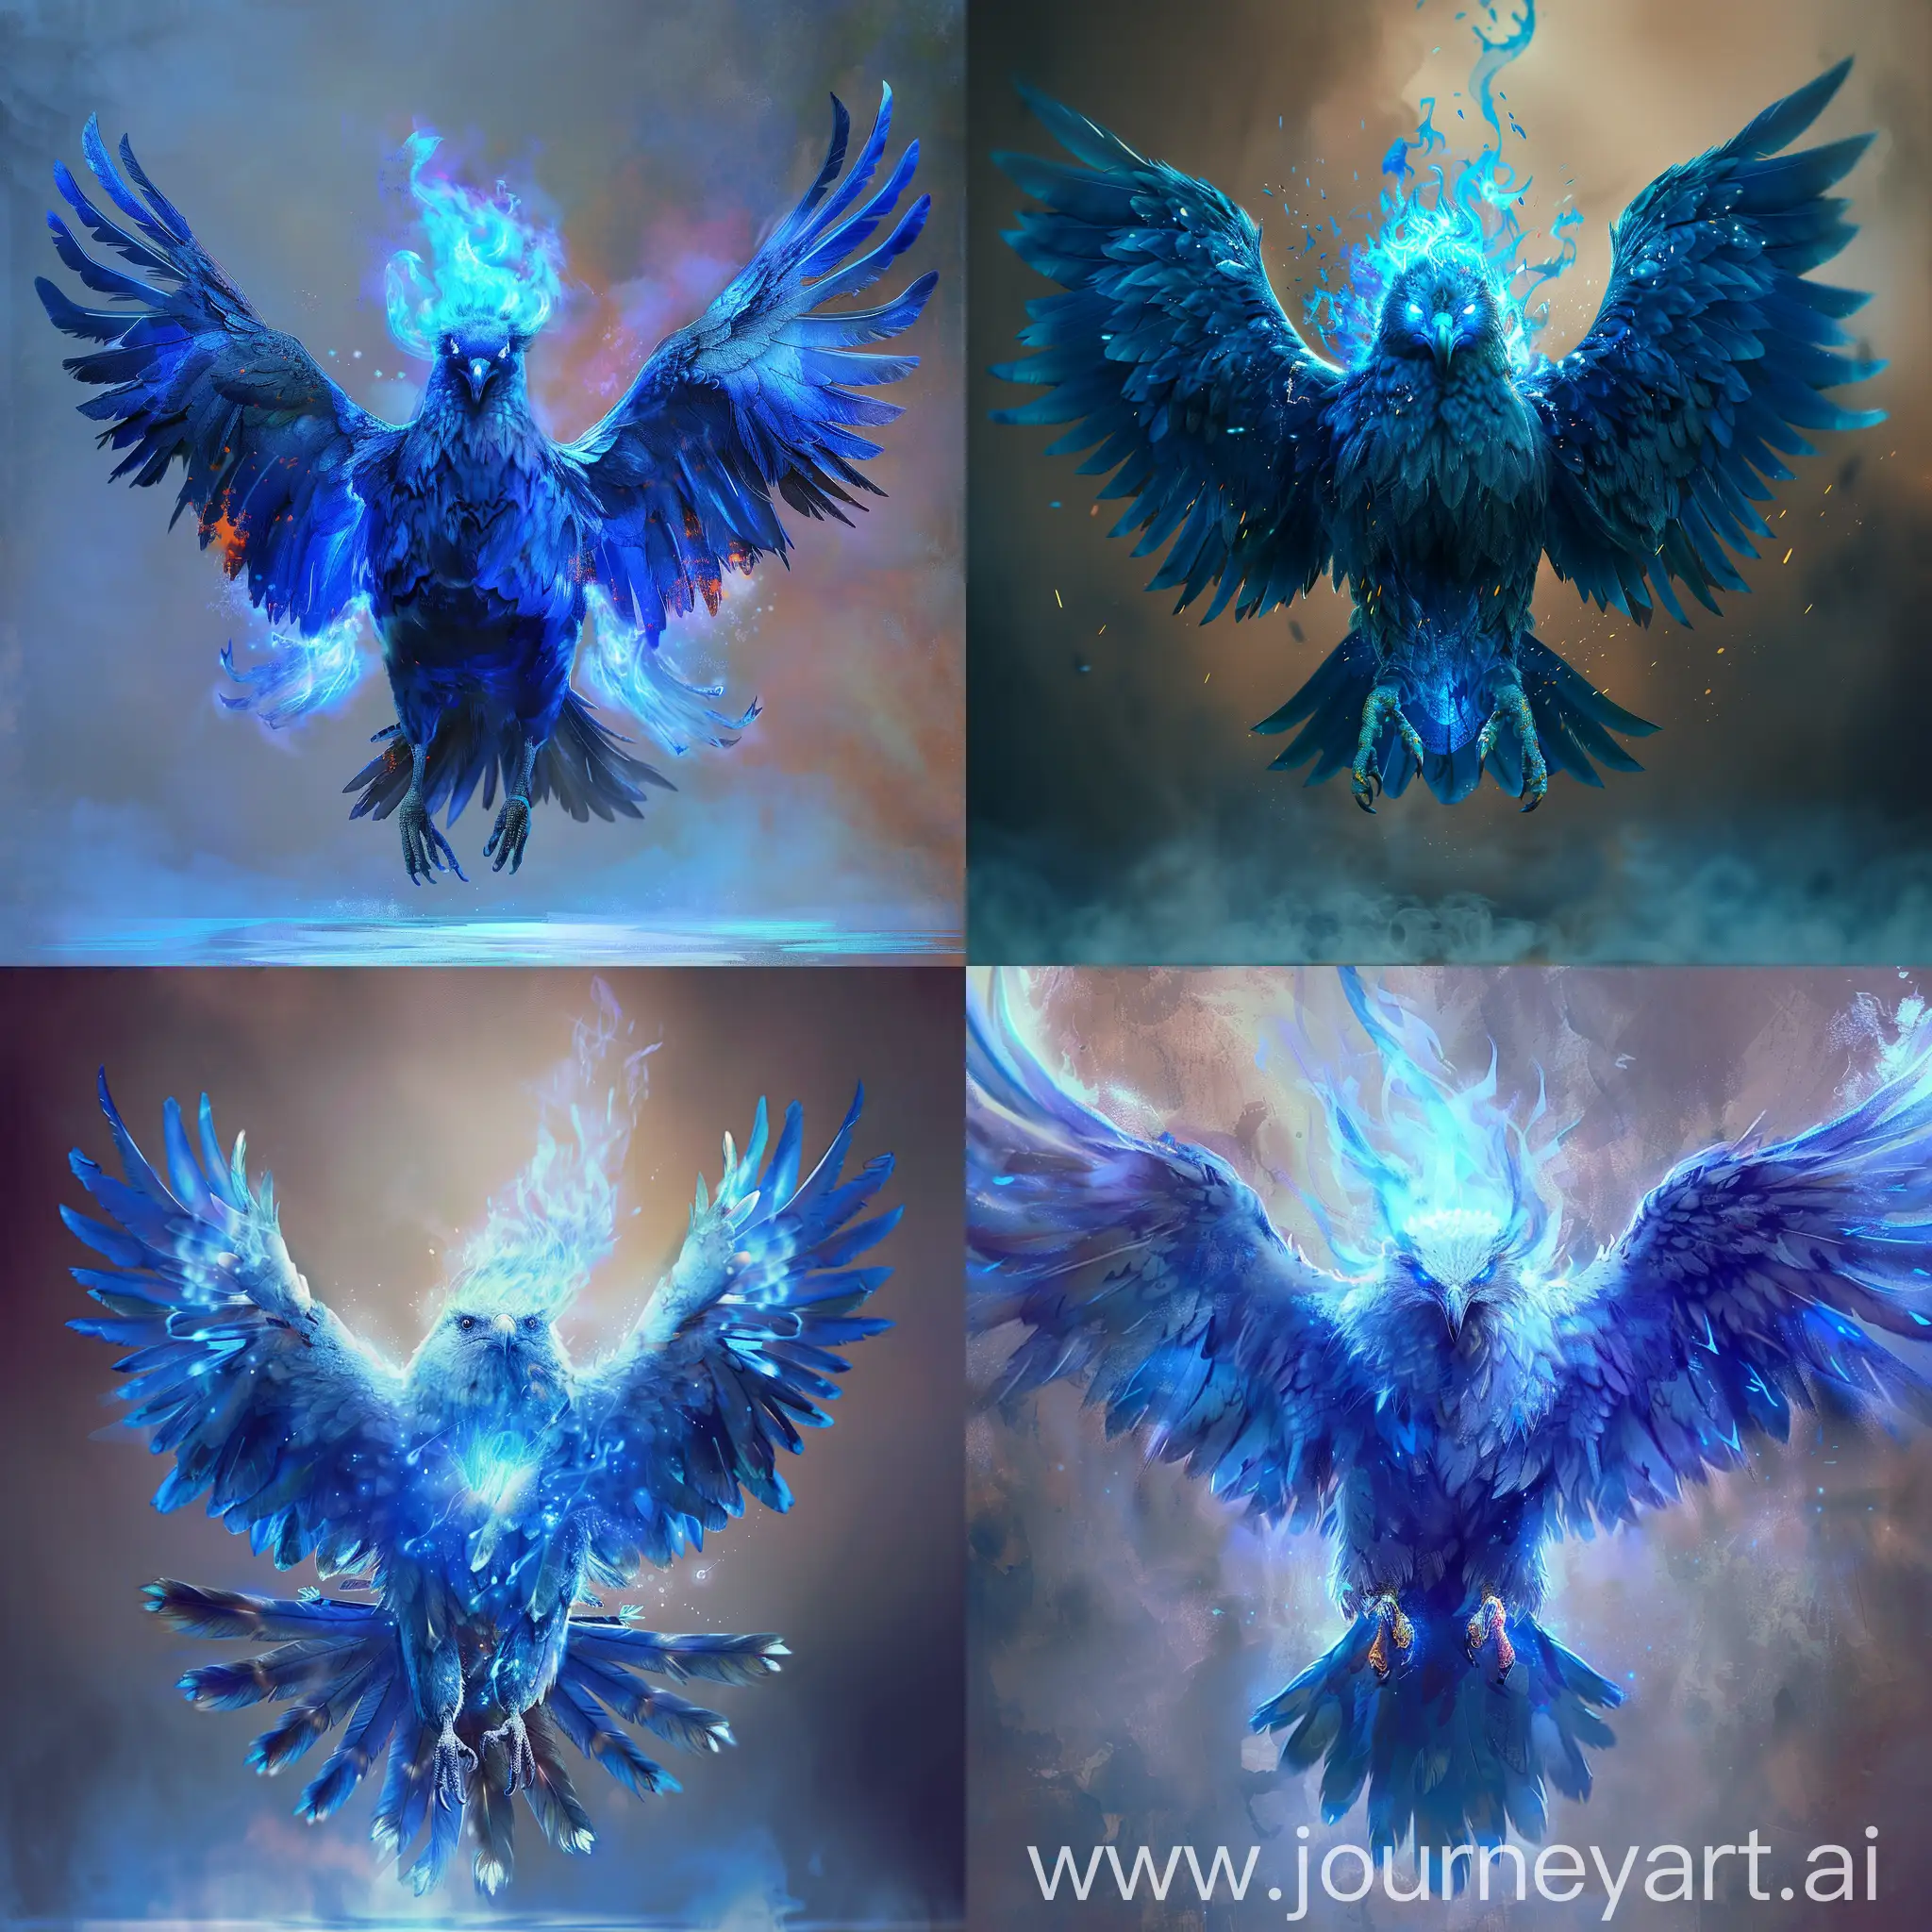 photograph, a huge majestic and very beautiful blue bird with a bright blue flame and glowing eyes spreads its wings and flies, front view, depth of composition, rich texture and careful detail, the background is a gradient of muted tones